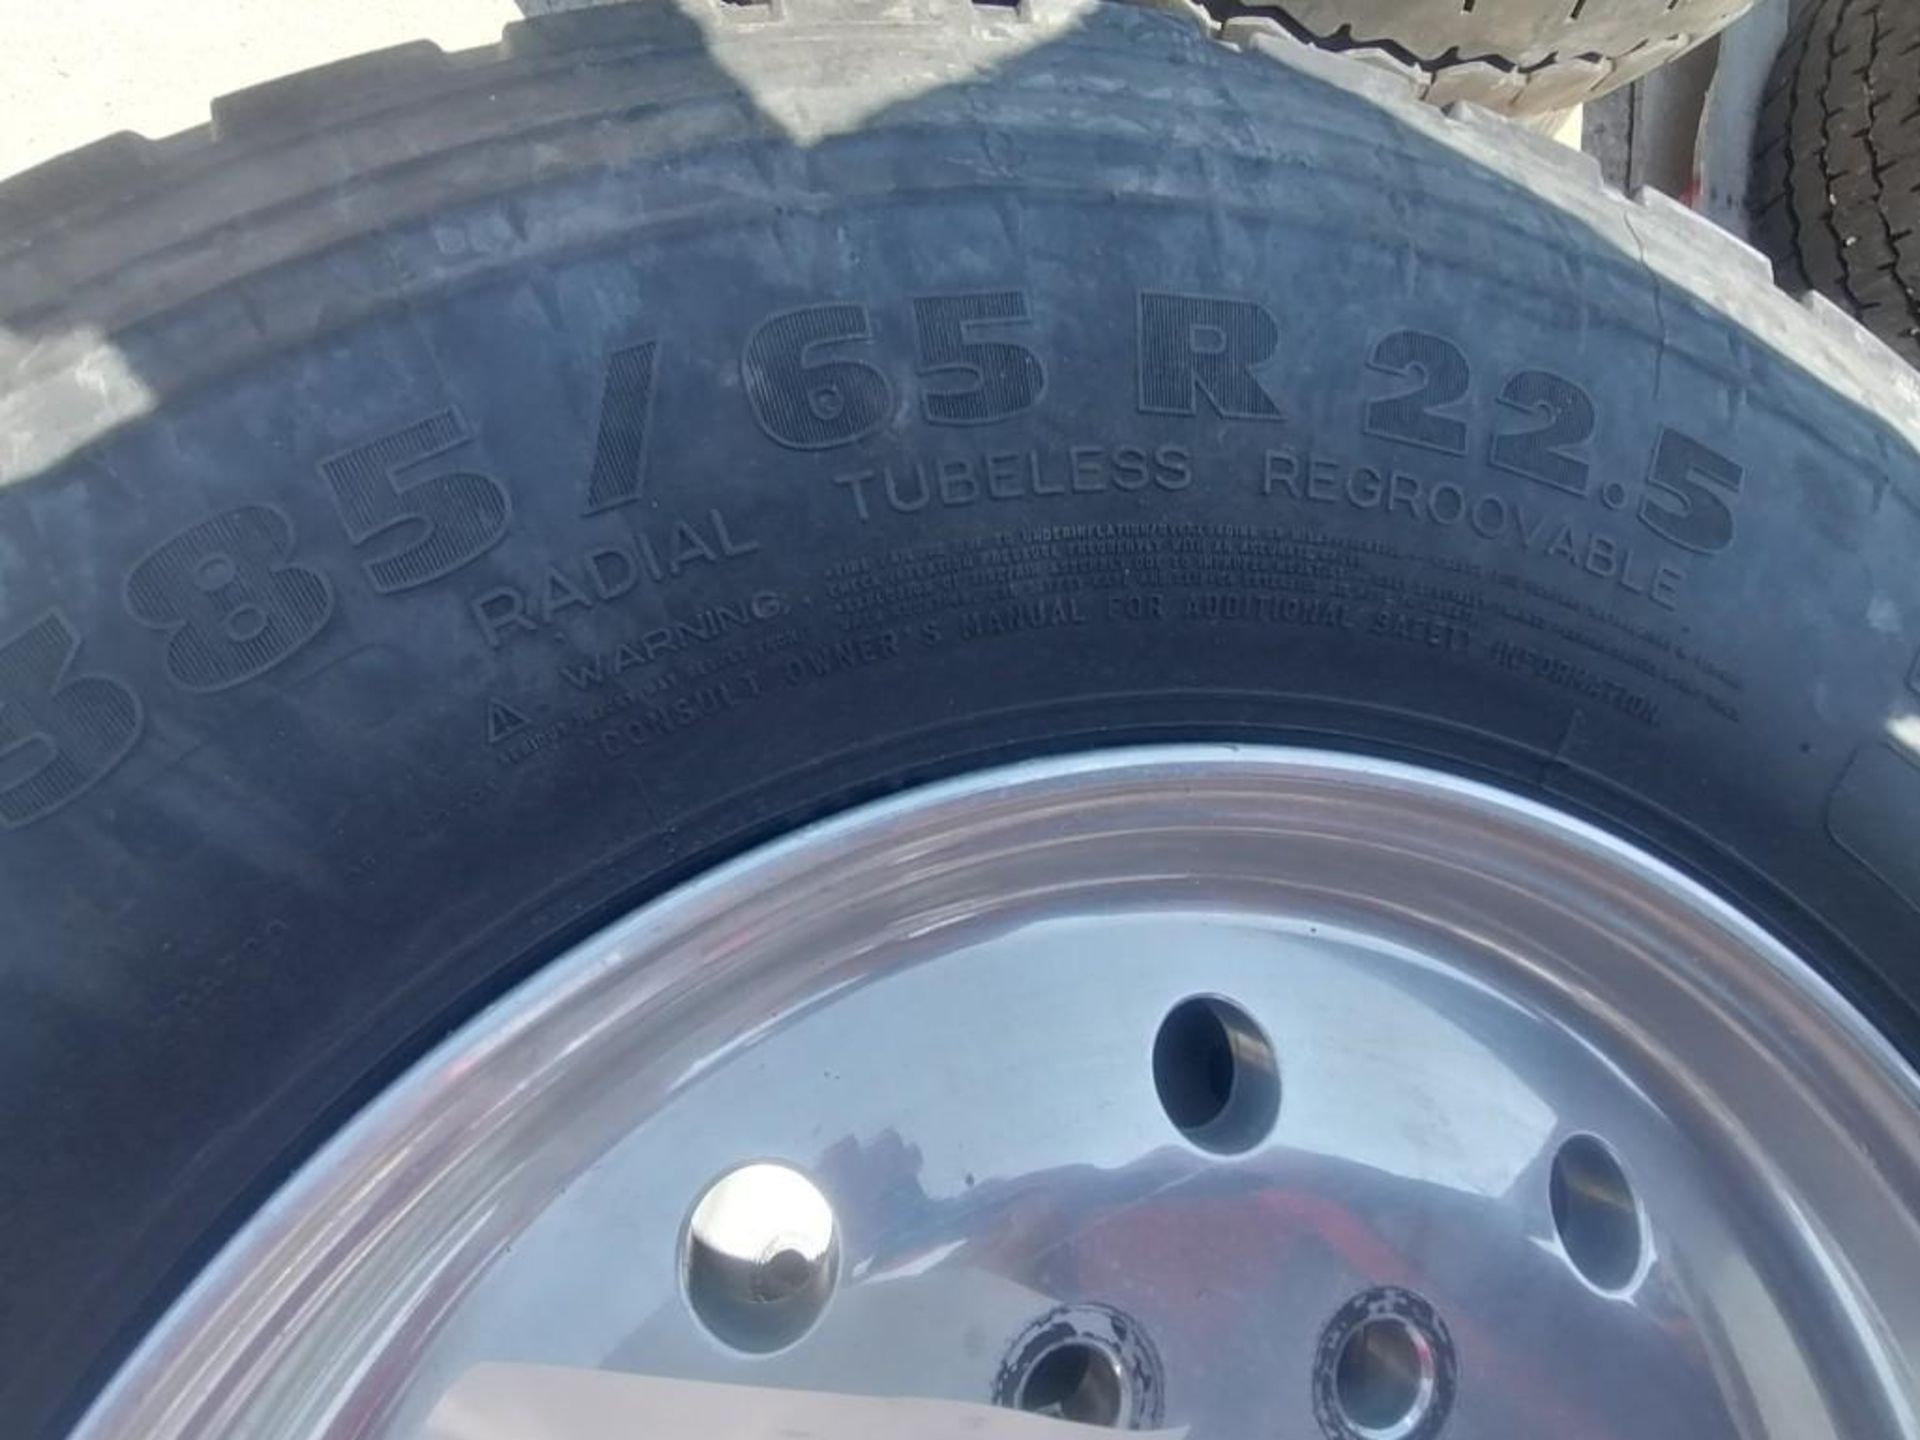 (2) Michelin 385/65R 22.5 Steer Tires with Rims. Located at 301 E Henry Street, Mt. Pleasant, IA - Image 3 of 4